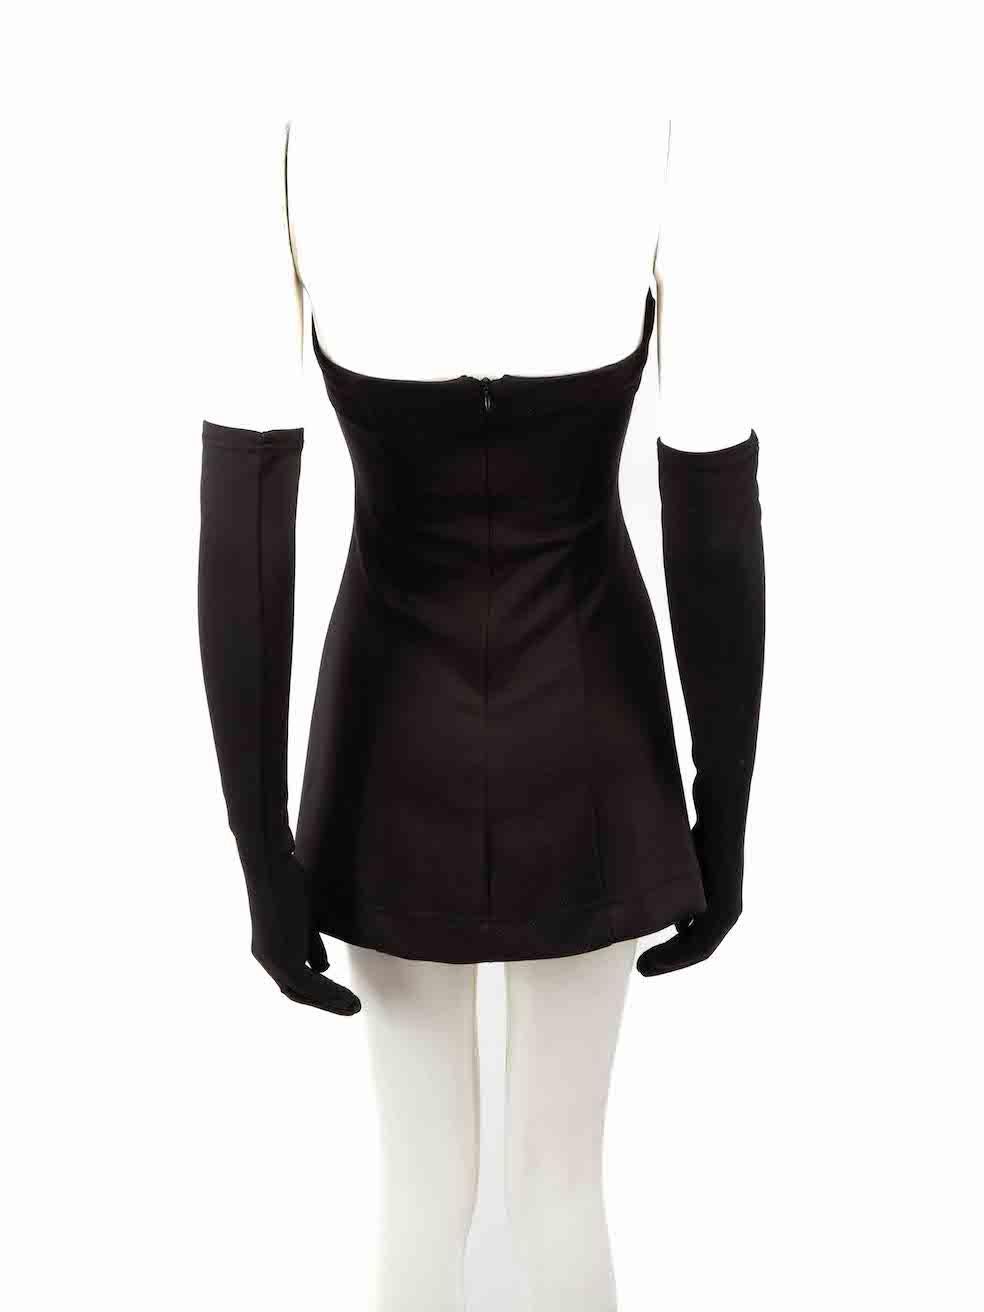 Miscreants Black Strapless Mini Dress With Gloves Size S In Good Condition For Sale In London, GB